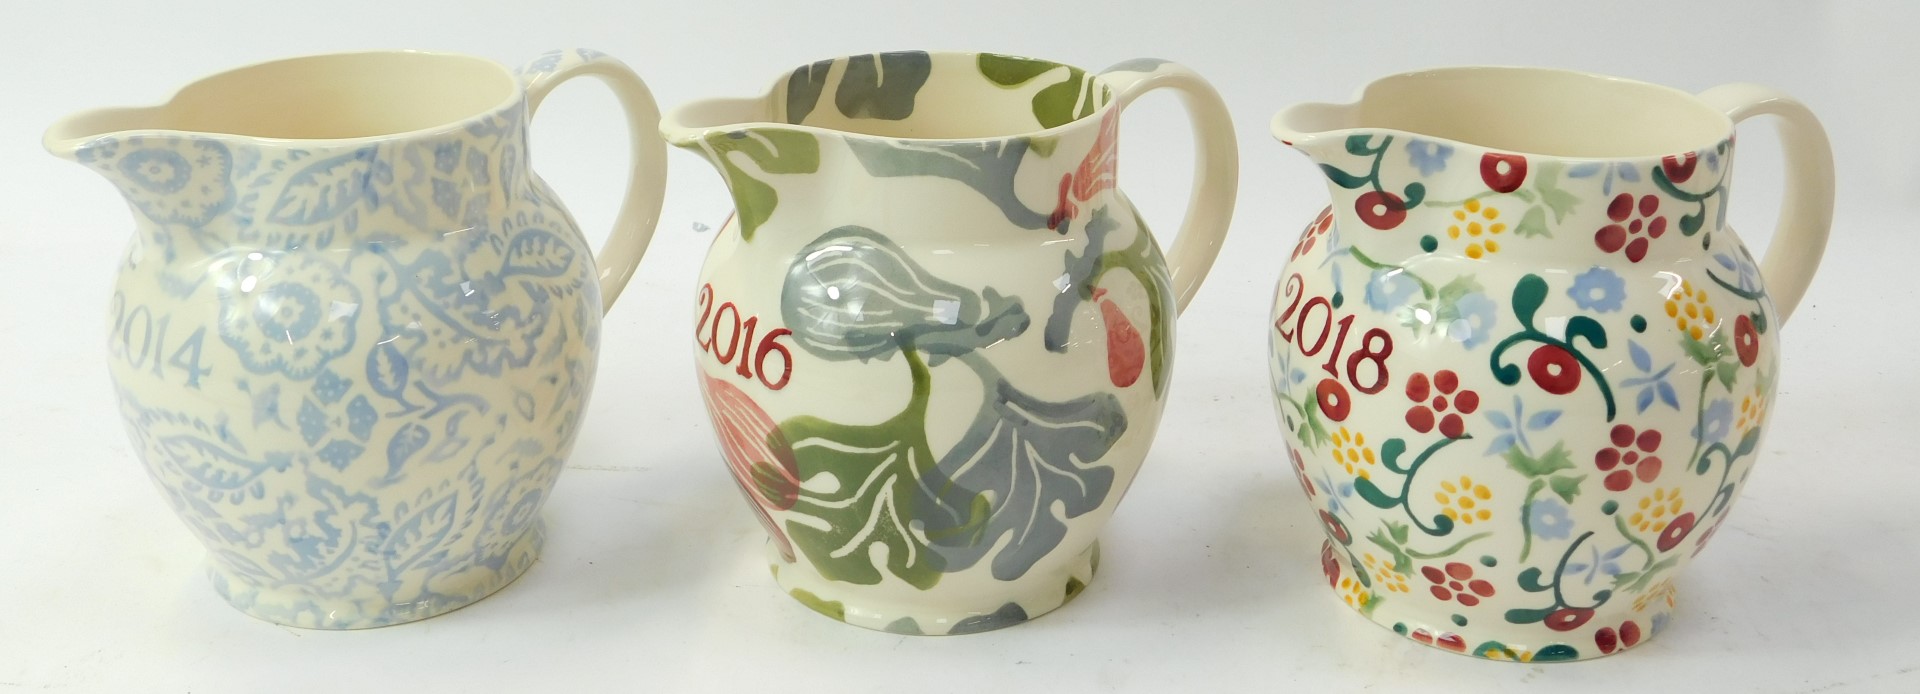 Three Emma Bridgewater pottery year jugs, for 2016, 2018 and 2014, 14cm high. - Image 2 of 3